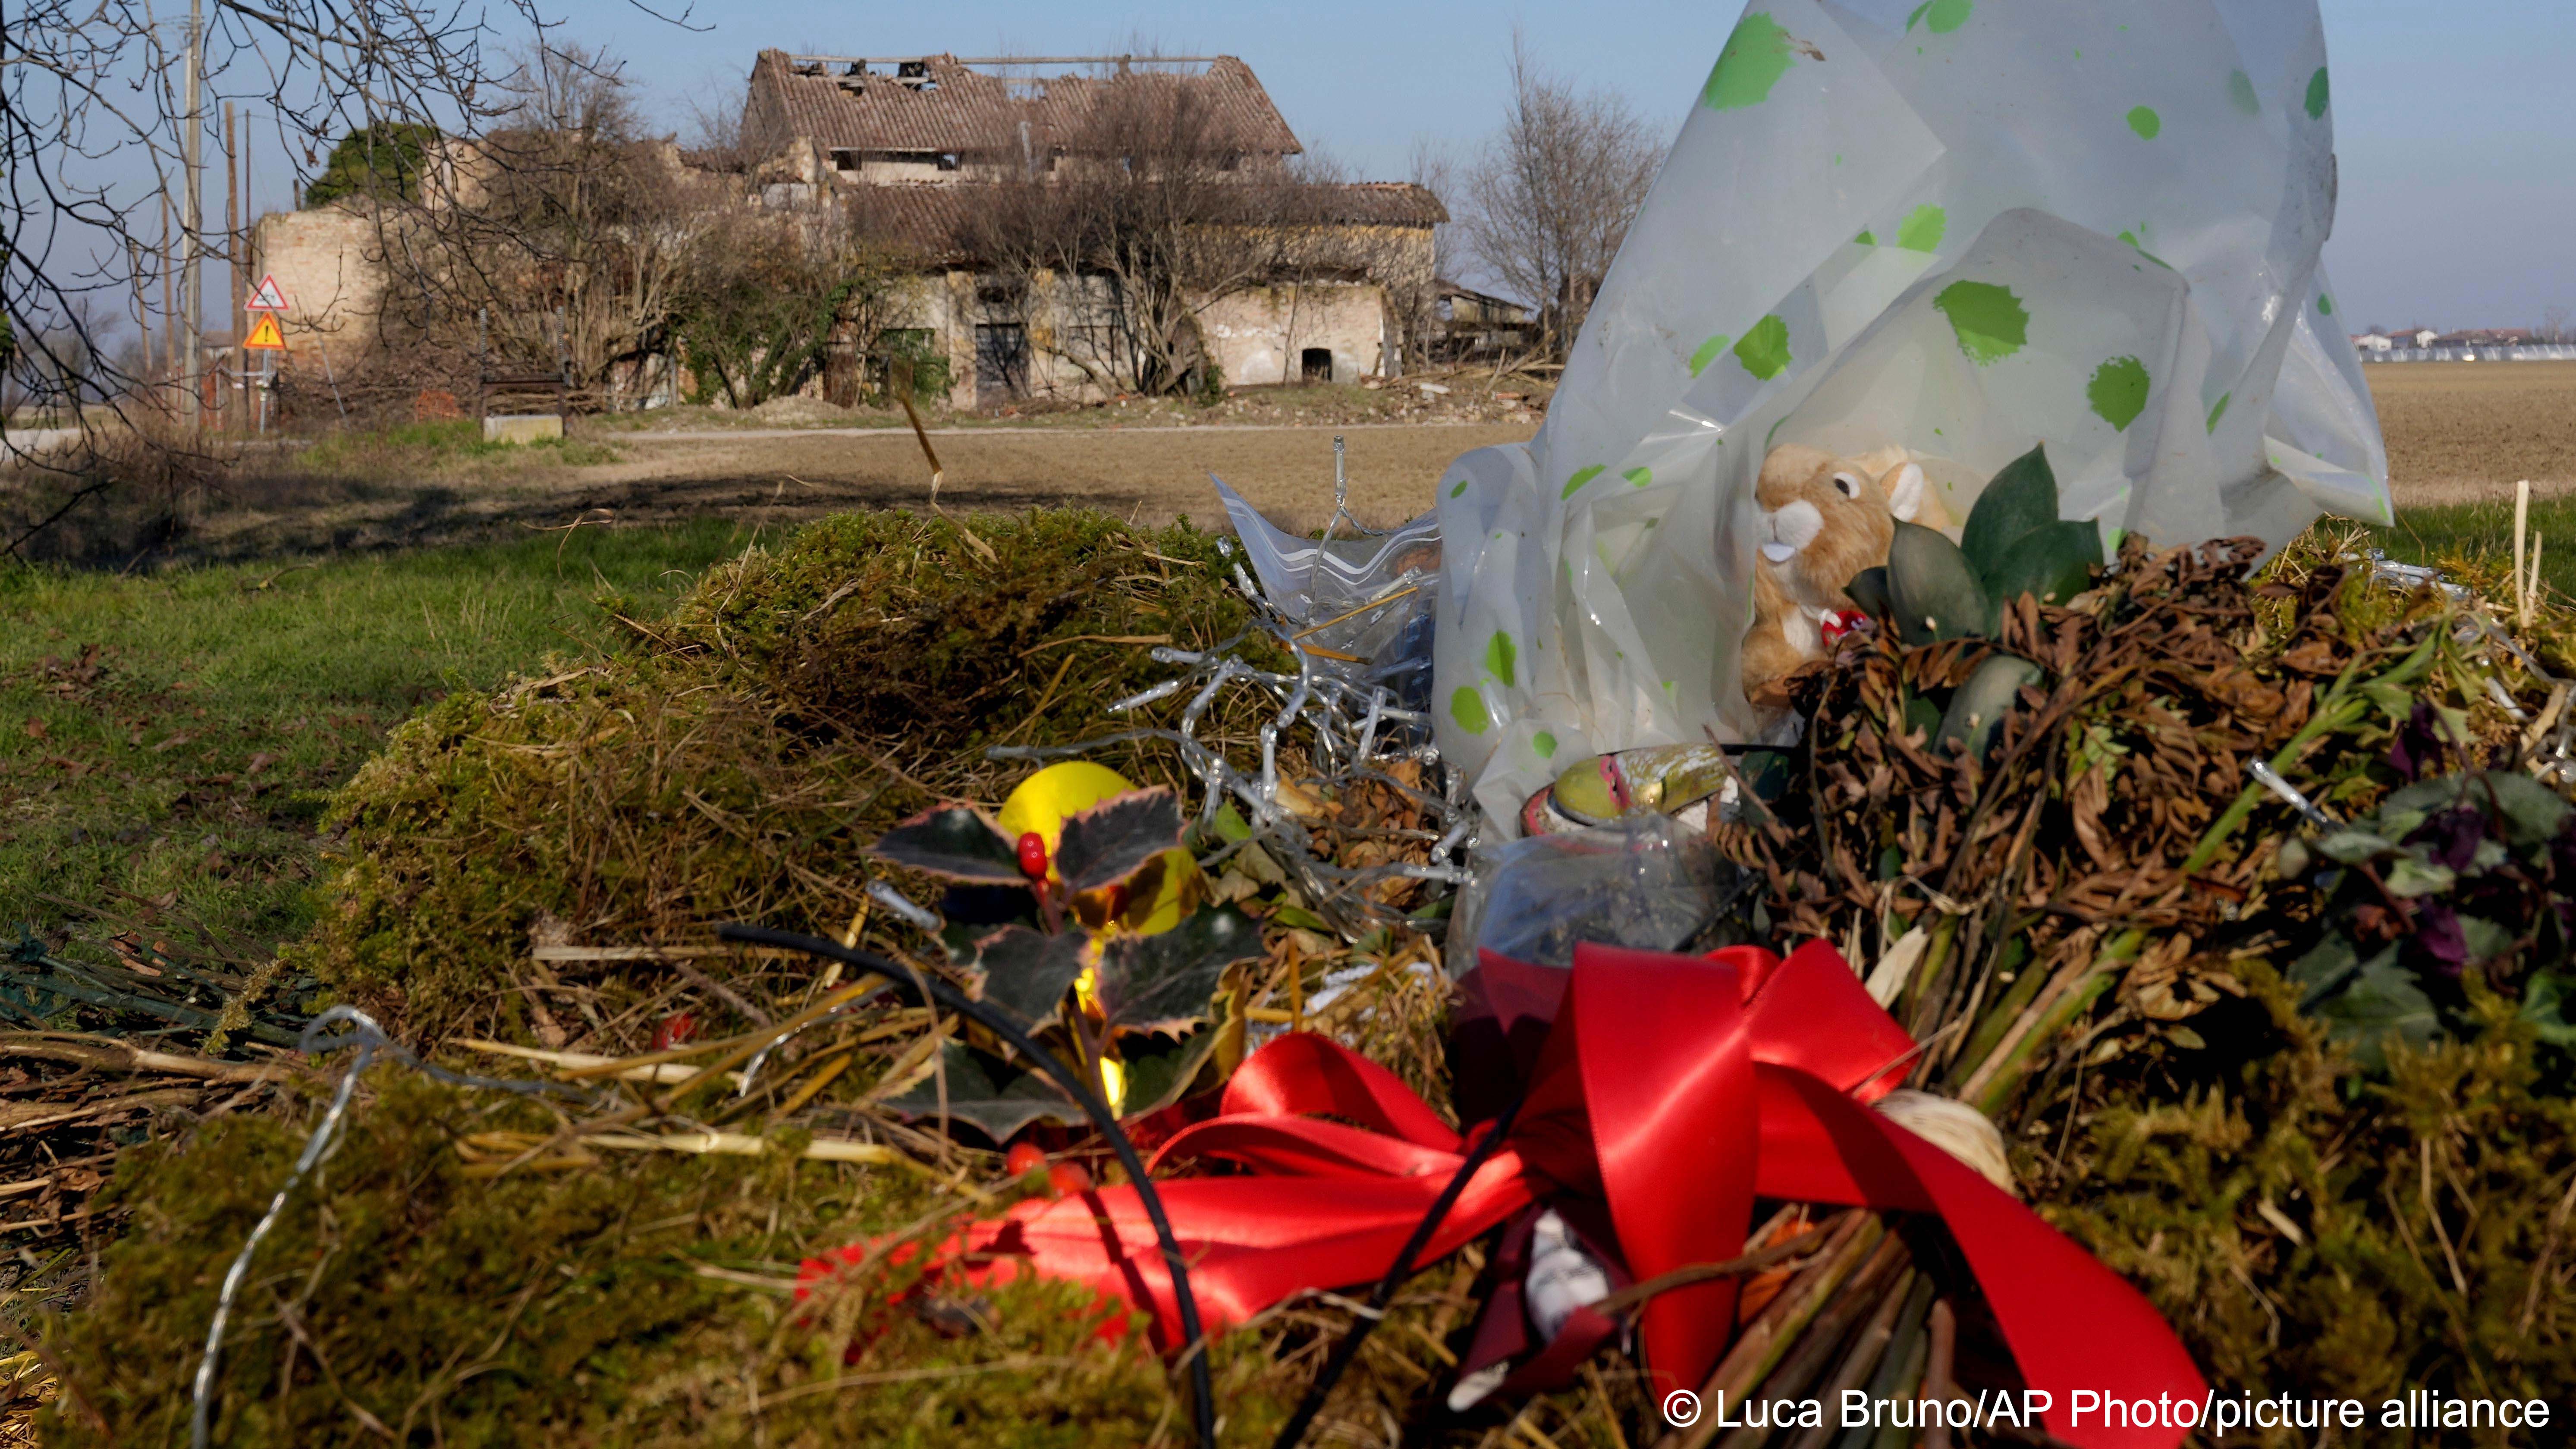 A stuffed toy squirrel and by now long dried flowers are left in tribute near the ruins of a farmhouse in Novellara, northern Italy, Friday, Feb. 10, 2023, where the body of Pakistani Saman Abbas was found in November 2021, nineteen months after she disappeared (image: Luca Bruno/AP Photo/picture alliance) 